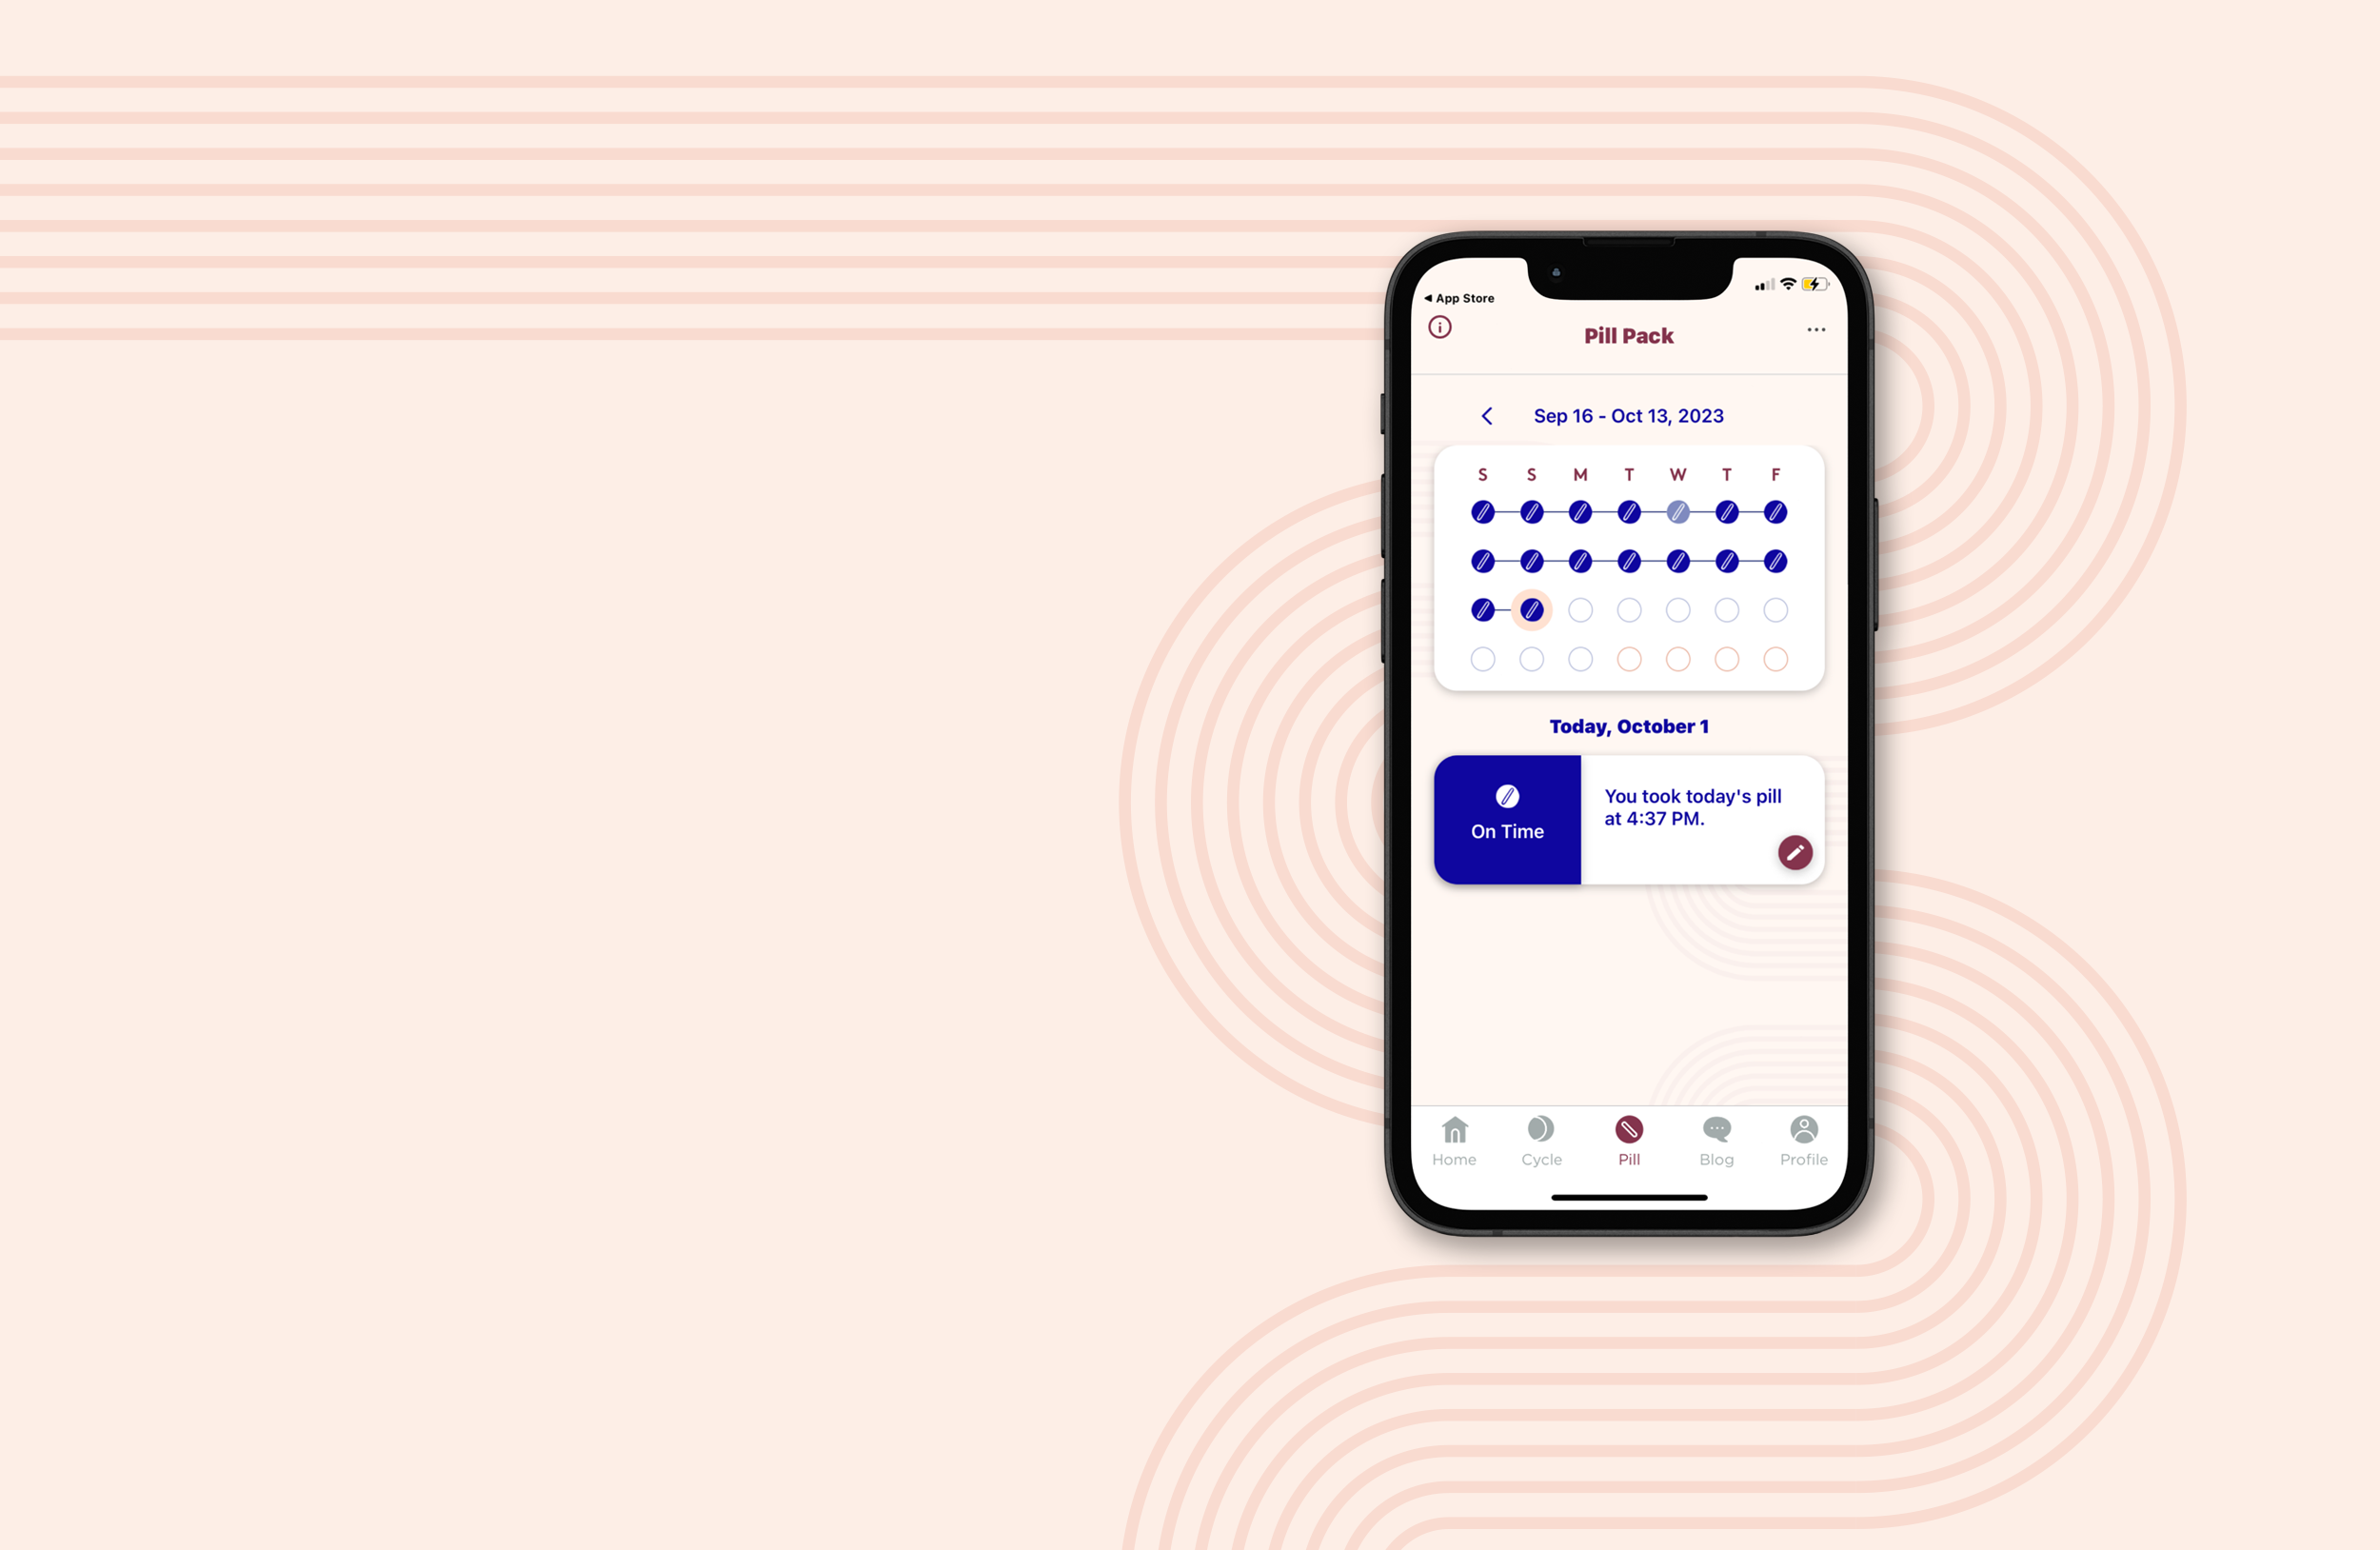 The Emme app shows you at a glance when you took your last birth control pill and when to take the next.